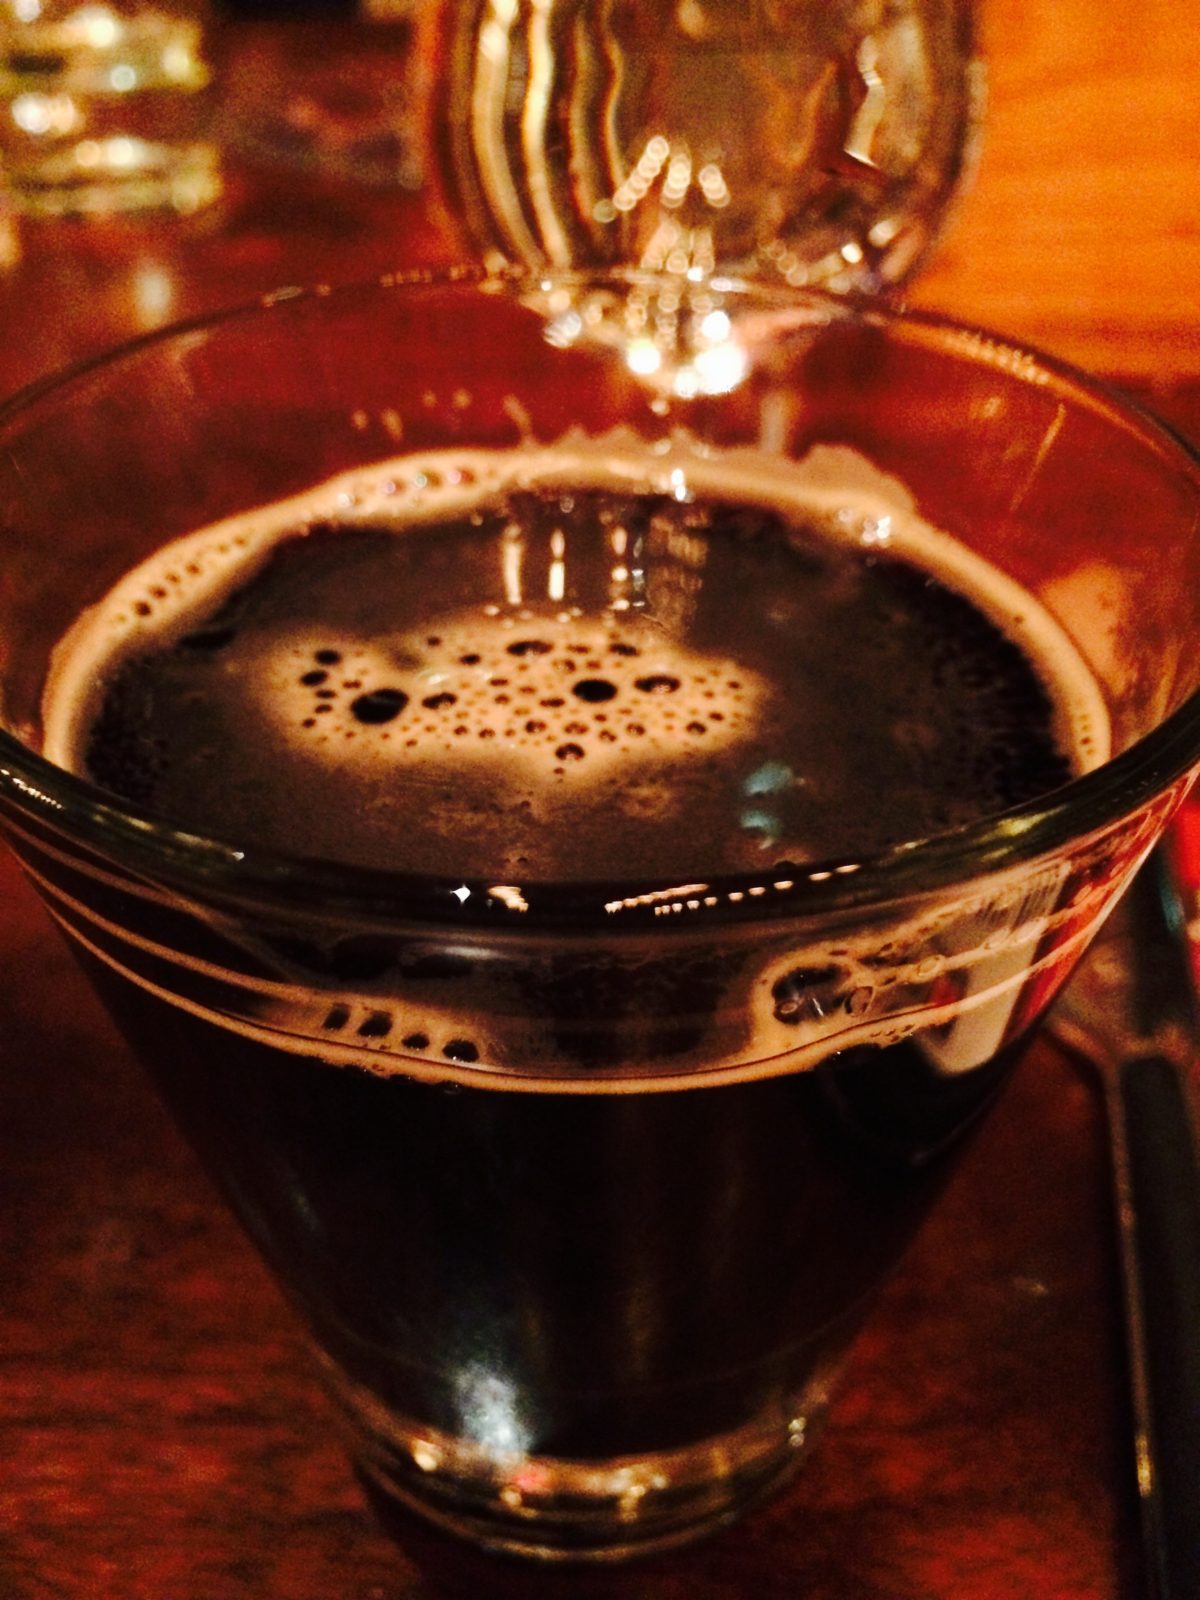 Obsidian Stout from Deschutes Brewery Beer Dinner at Cook Hall Dallas